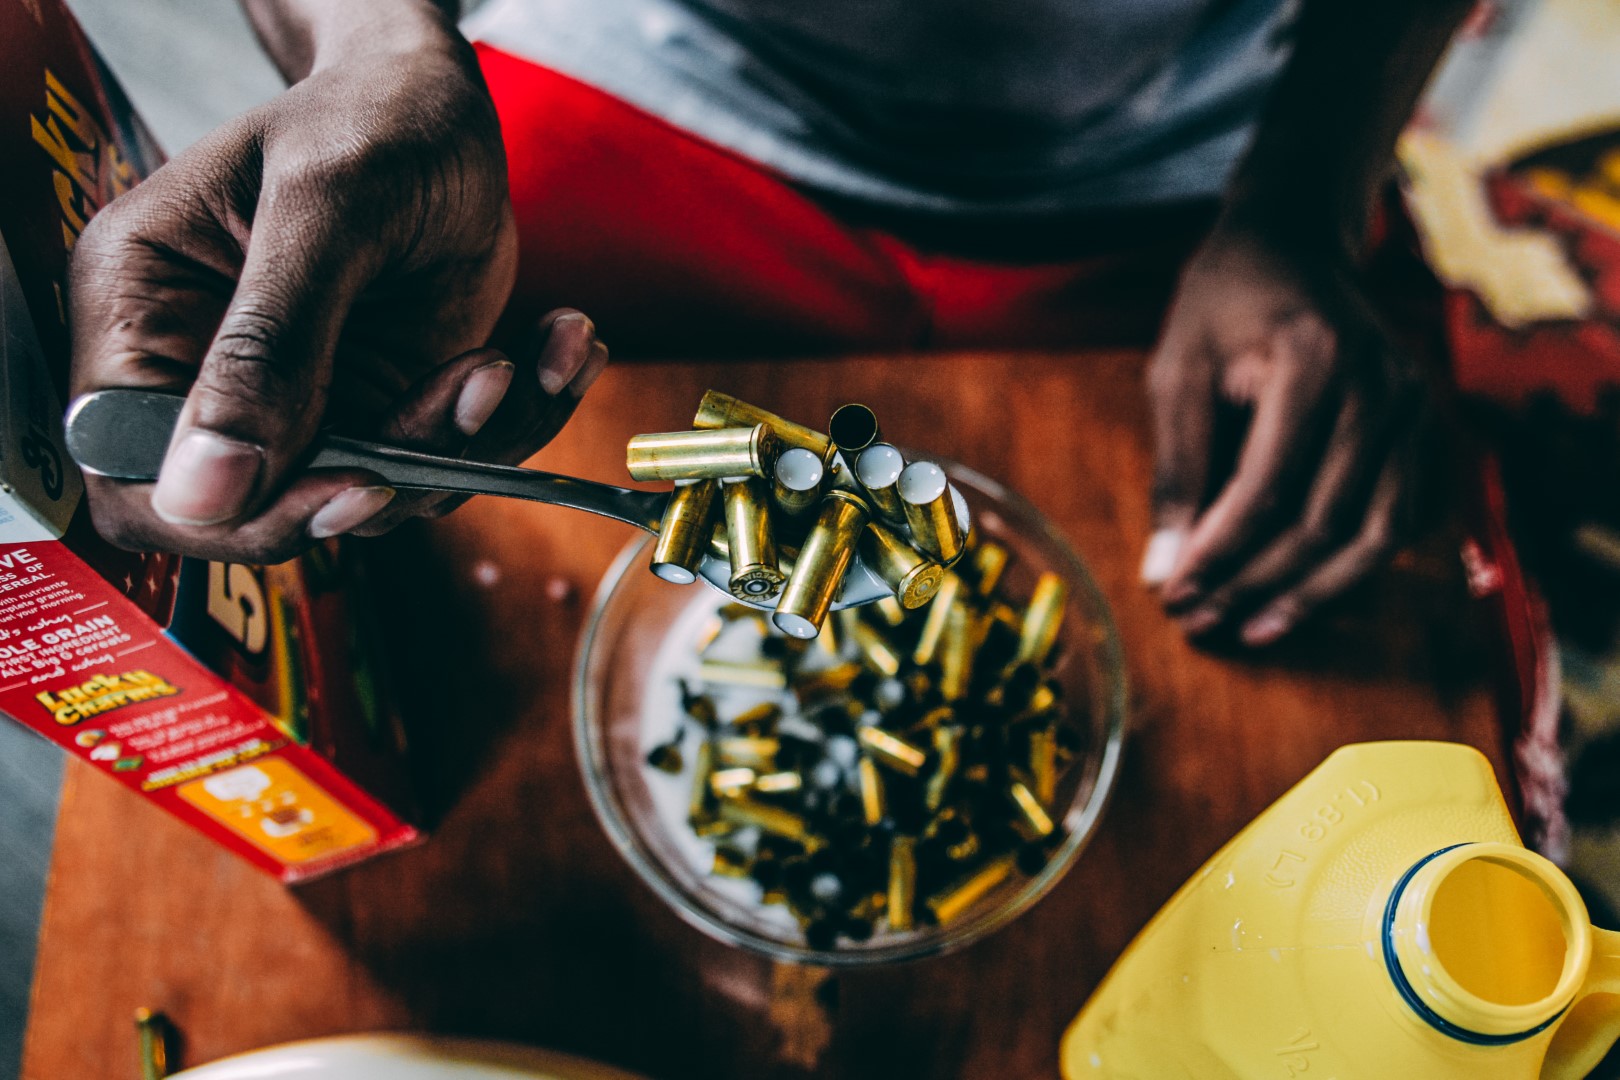 Overhead shot of a man in red shorts holding a spoon full of bullet shells from a glass bowl of milk. There’s a cereal box in the left corner and a yellow, gallon of milk in the lower, right corner.